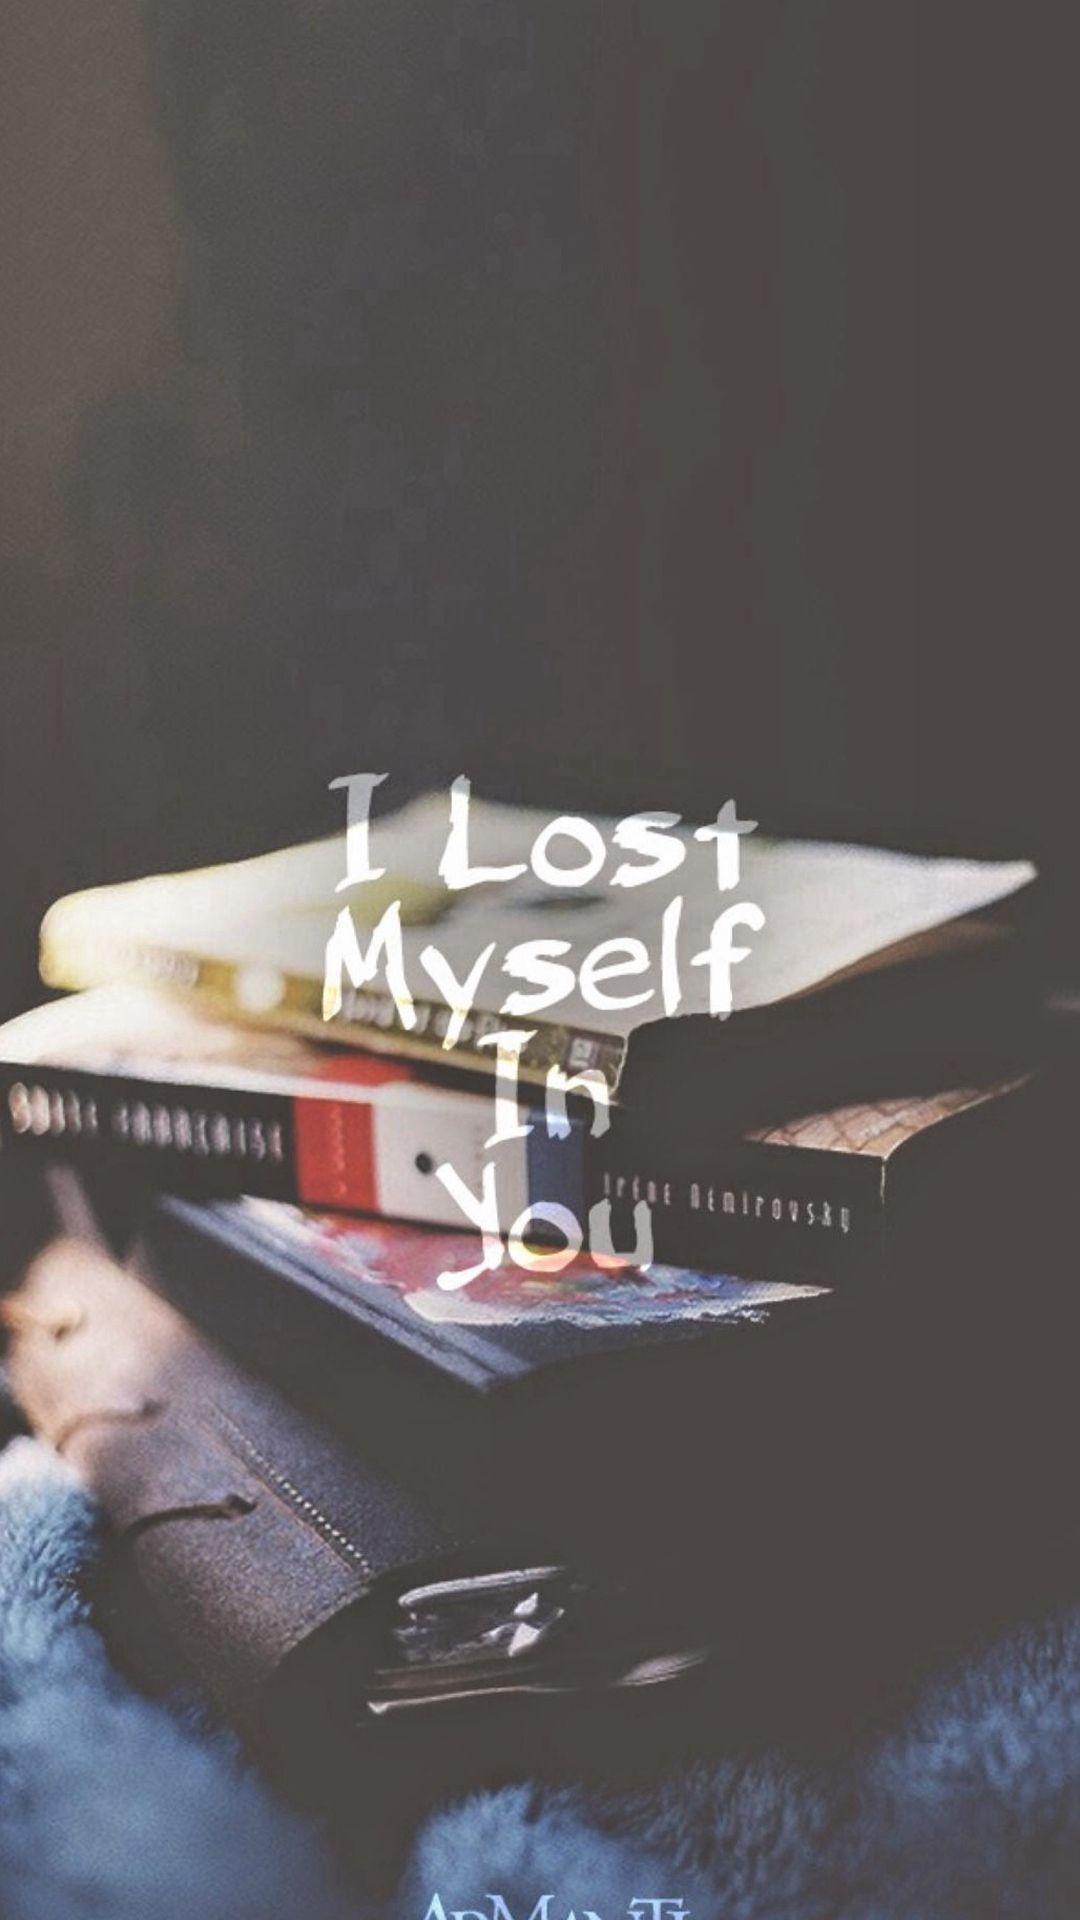 I Lost Myself In You Find more inspirational wallpaper